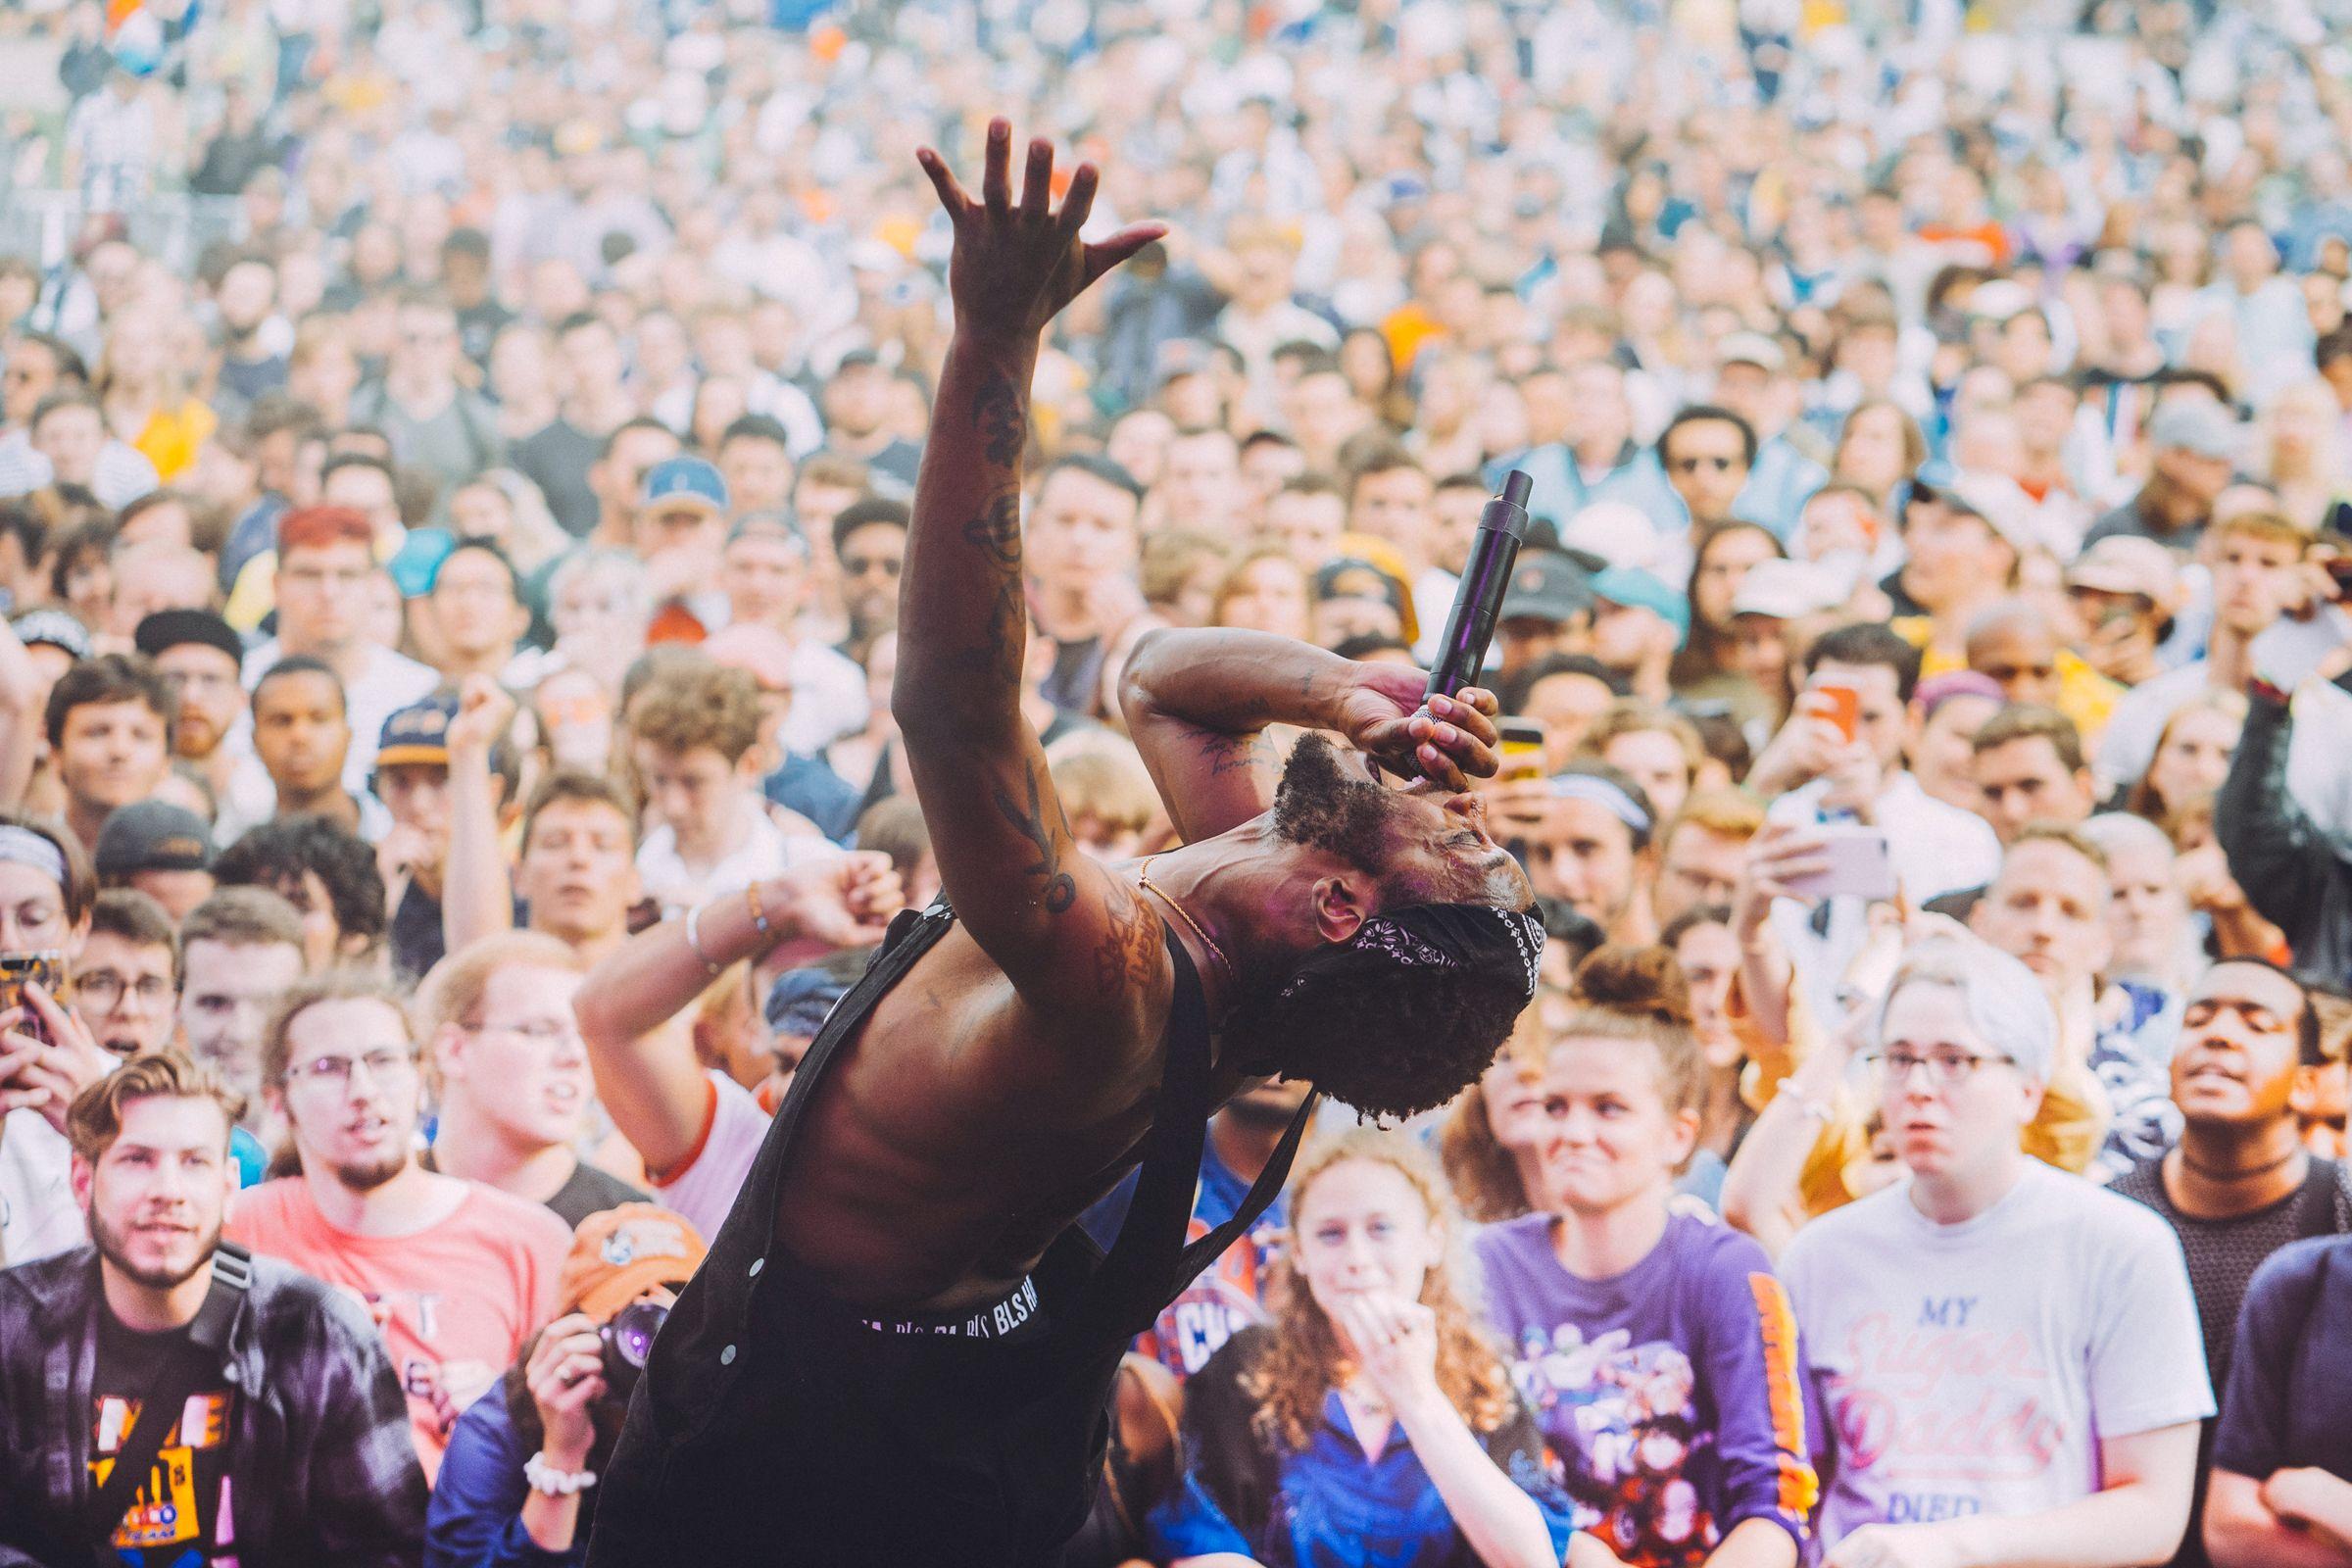 JPEGMAFIA performs at Pitchfork Music Festival in 2019. (Photo by Matt Lief Anderson)